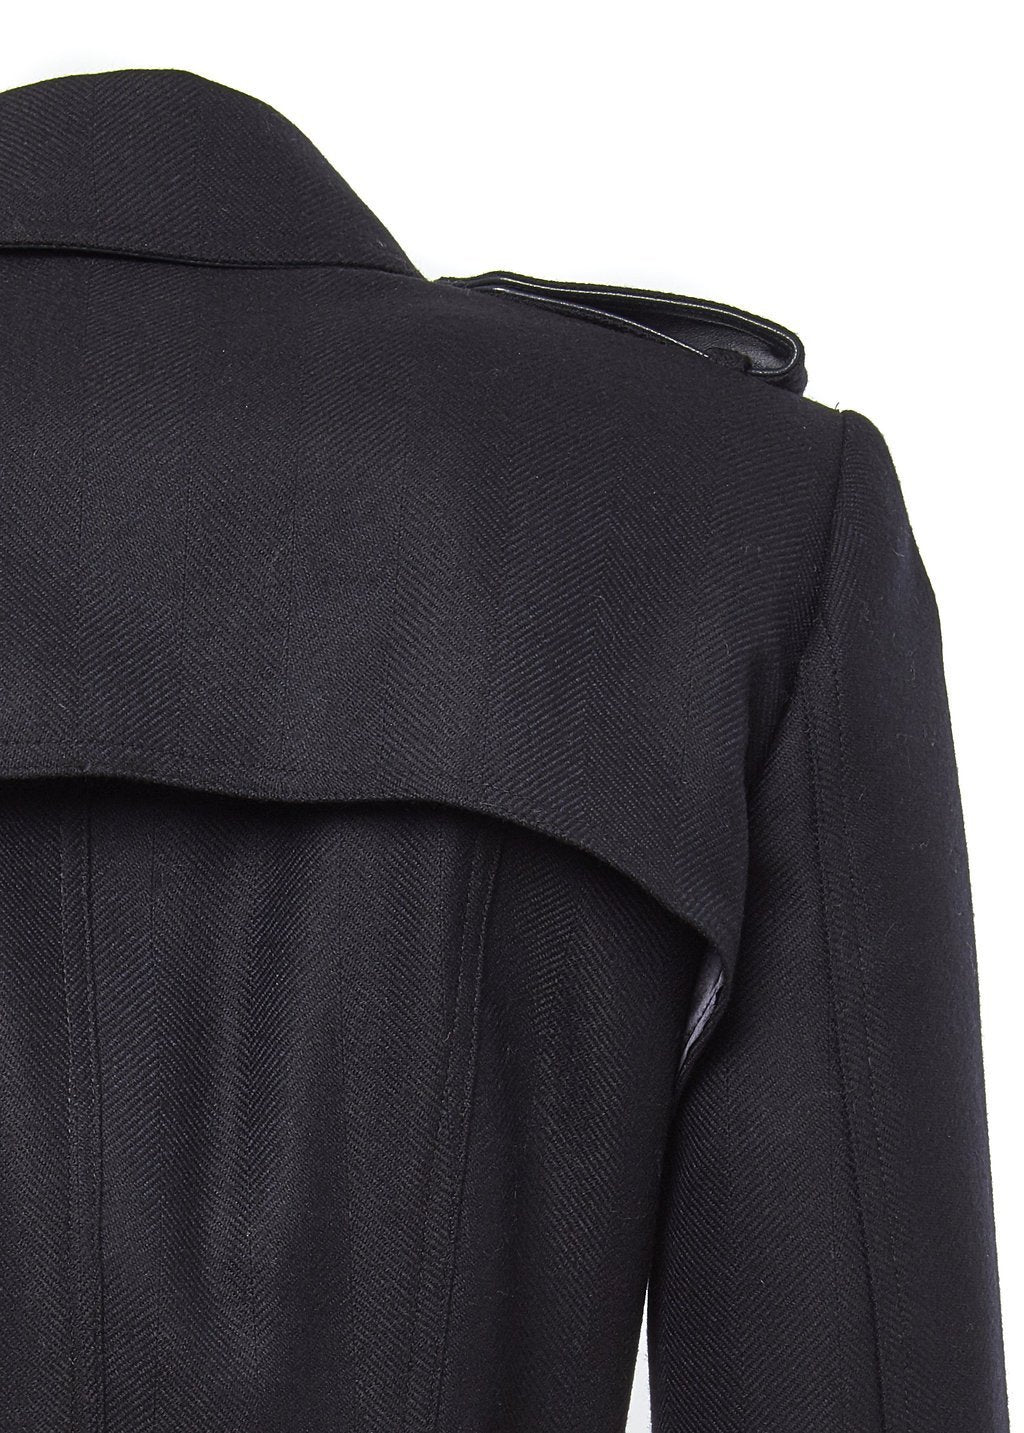 Shoulder detail of womens navy detailed with gold hardware knee length wool trench coat